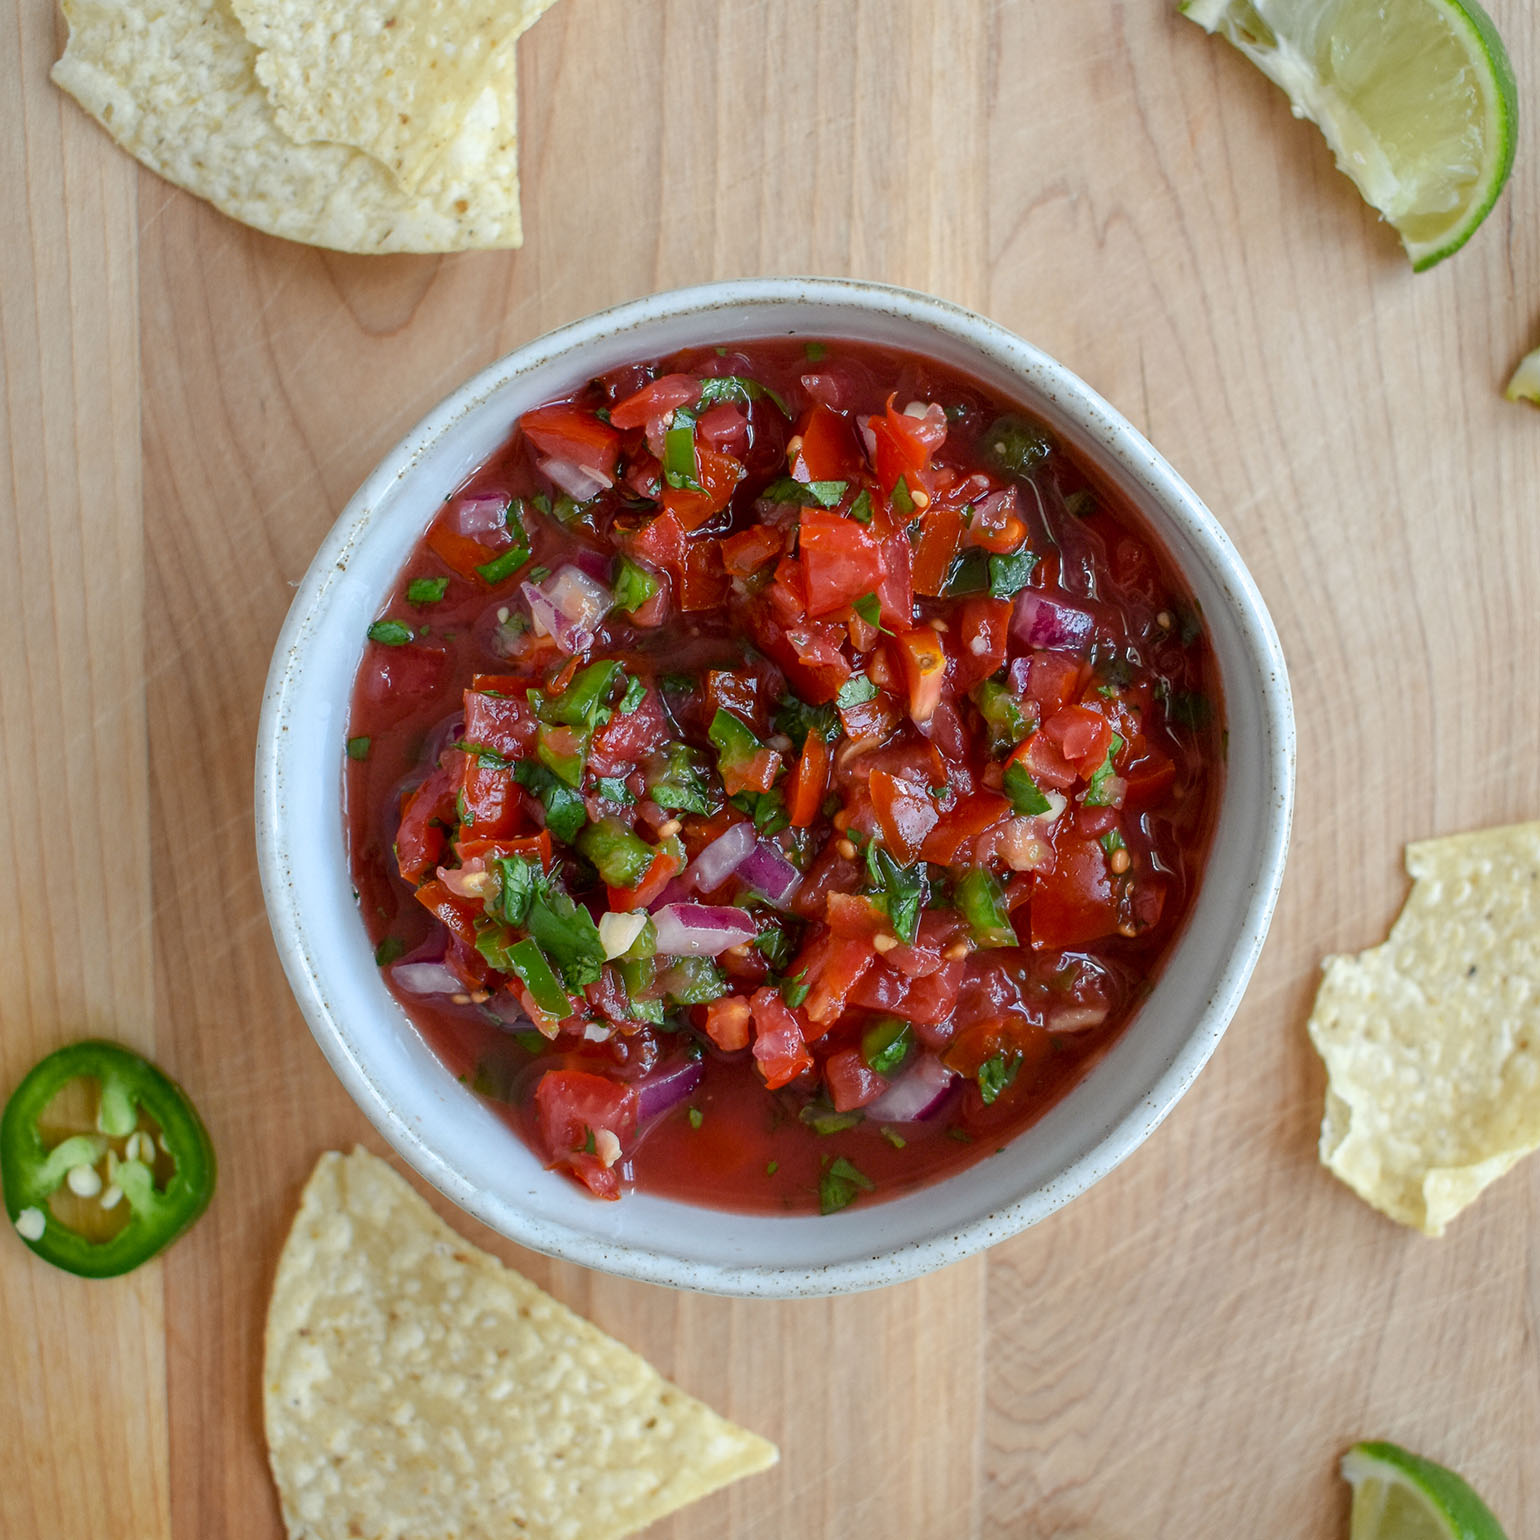 Simple homemade tomato salsa with tortilla chips